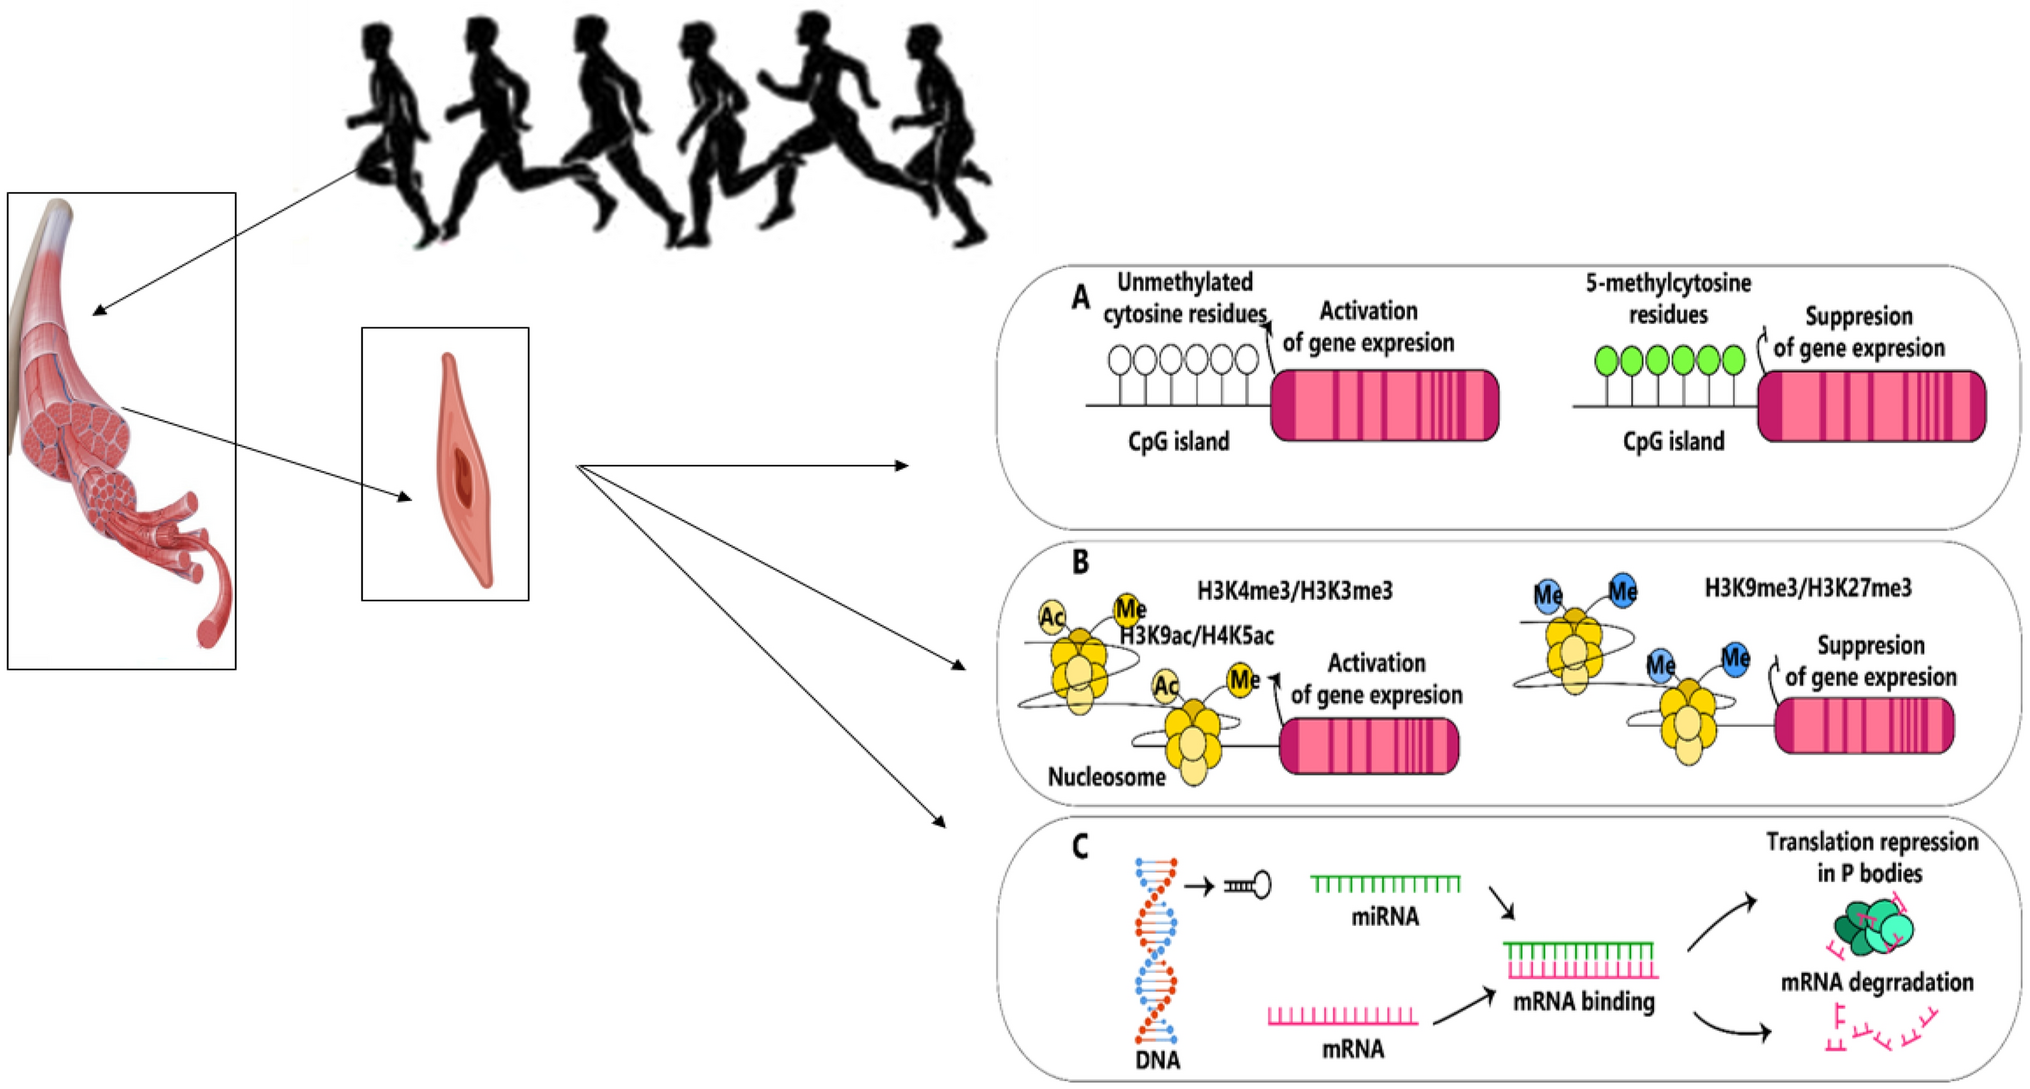 The effects of exercise on epigenetic modifications: focus on DNA methylation, histone modifications and non-coding RNAs